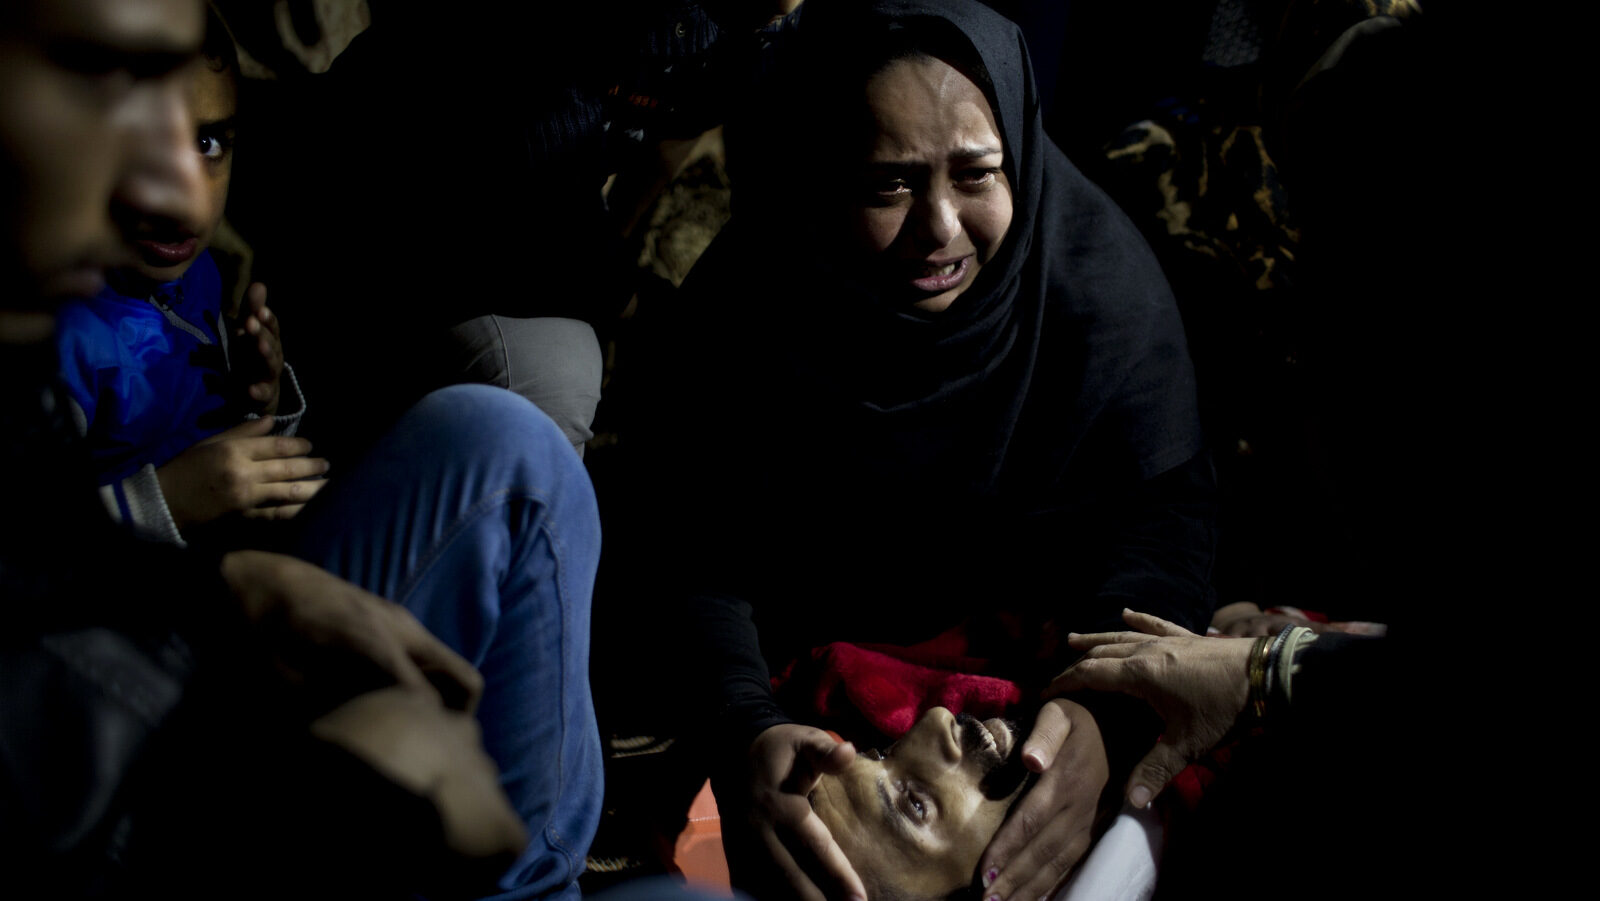 Relatives of Palestinian Muhammed al-Aqraa, who was killed in an explosion in a smuggling tunnel at the border between Gaza and Egypt, mourn over his body in his family house during his funeral, Thursday, Feb. 9, 2017. Palestinian officials say an Israeli pre-dawn airstrike has killed several Gaza residents and wounded five others in a smuggling tunnel along the border with Egypt. The bombing appears to be the first to target smuggling tunnels since the 2014 war between Israel and Gaza's Hamas rulers. (AP Photo/ Khalil Hamra)